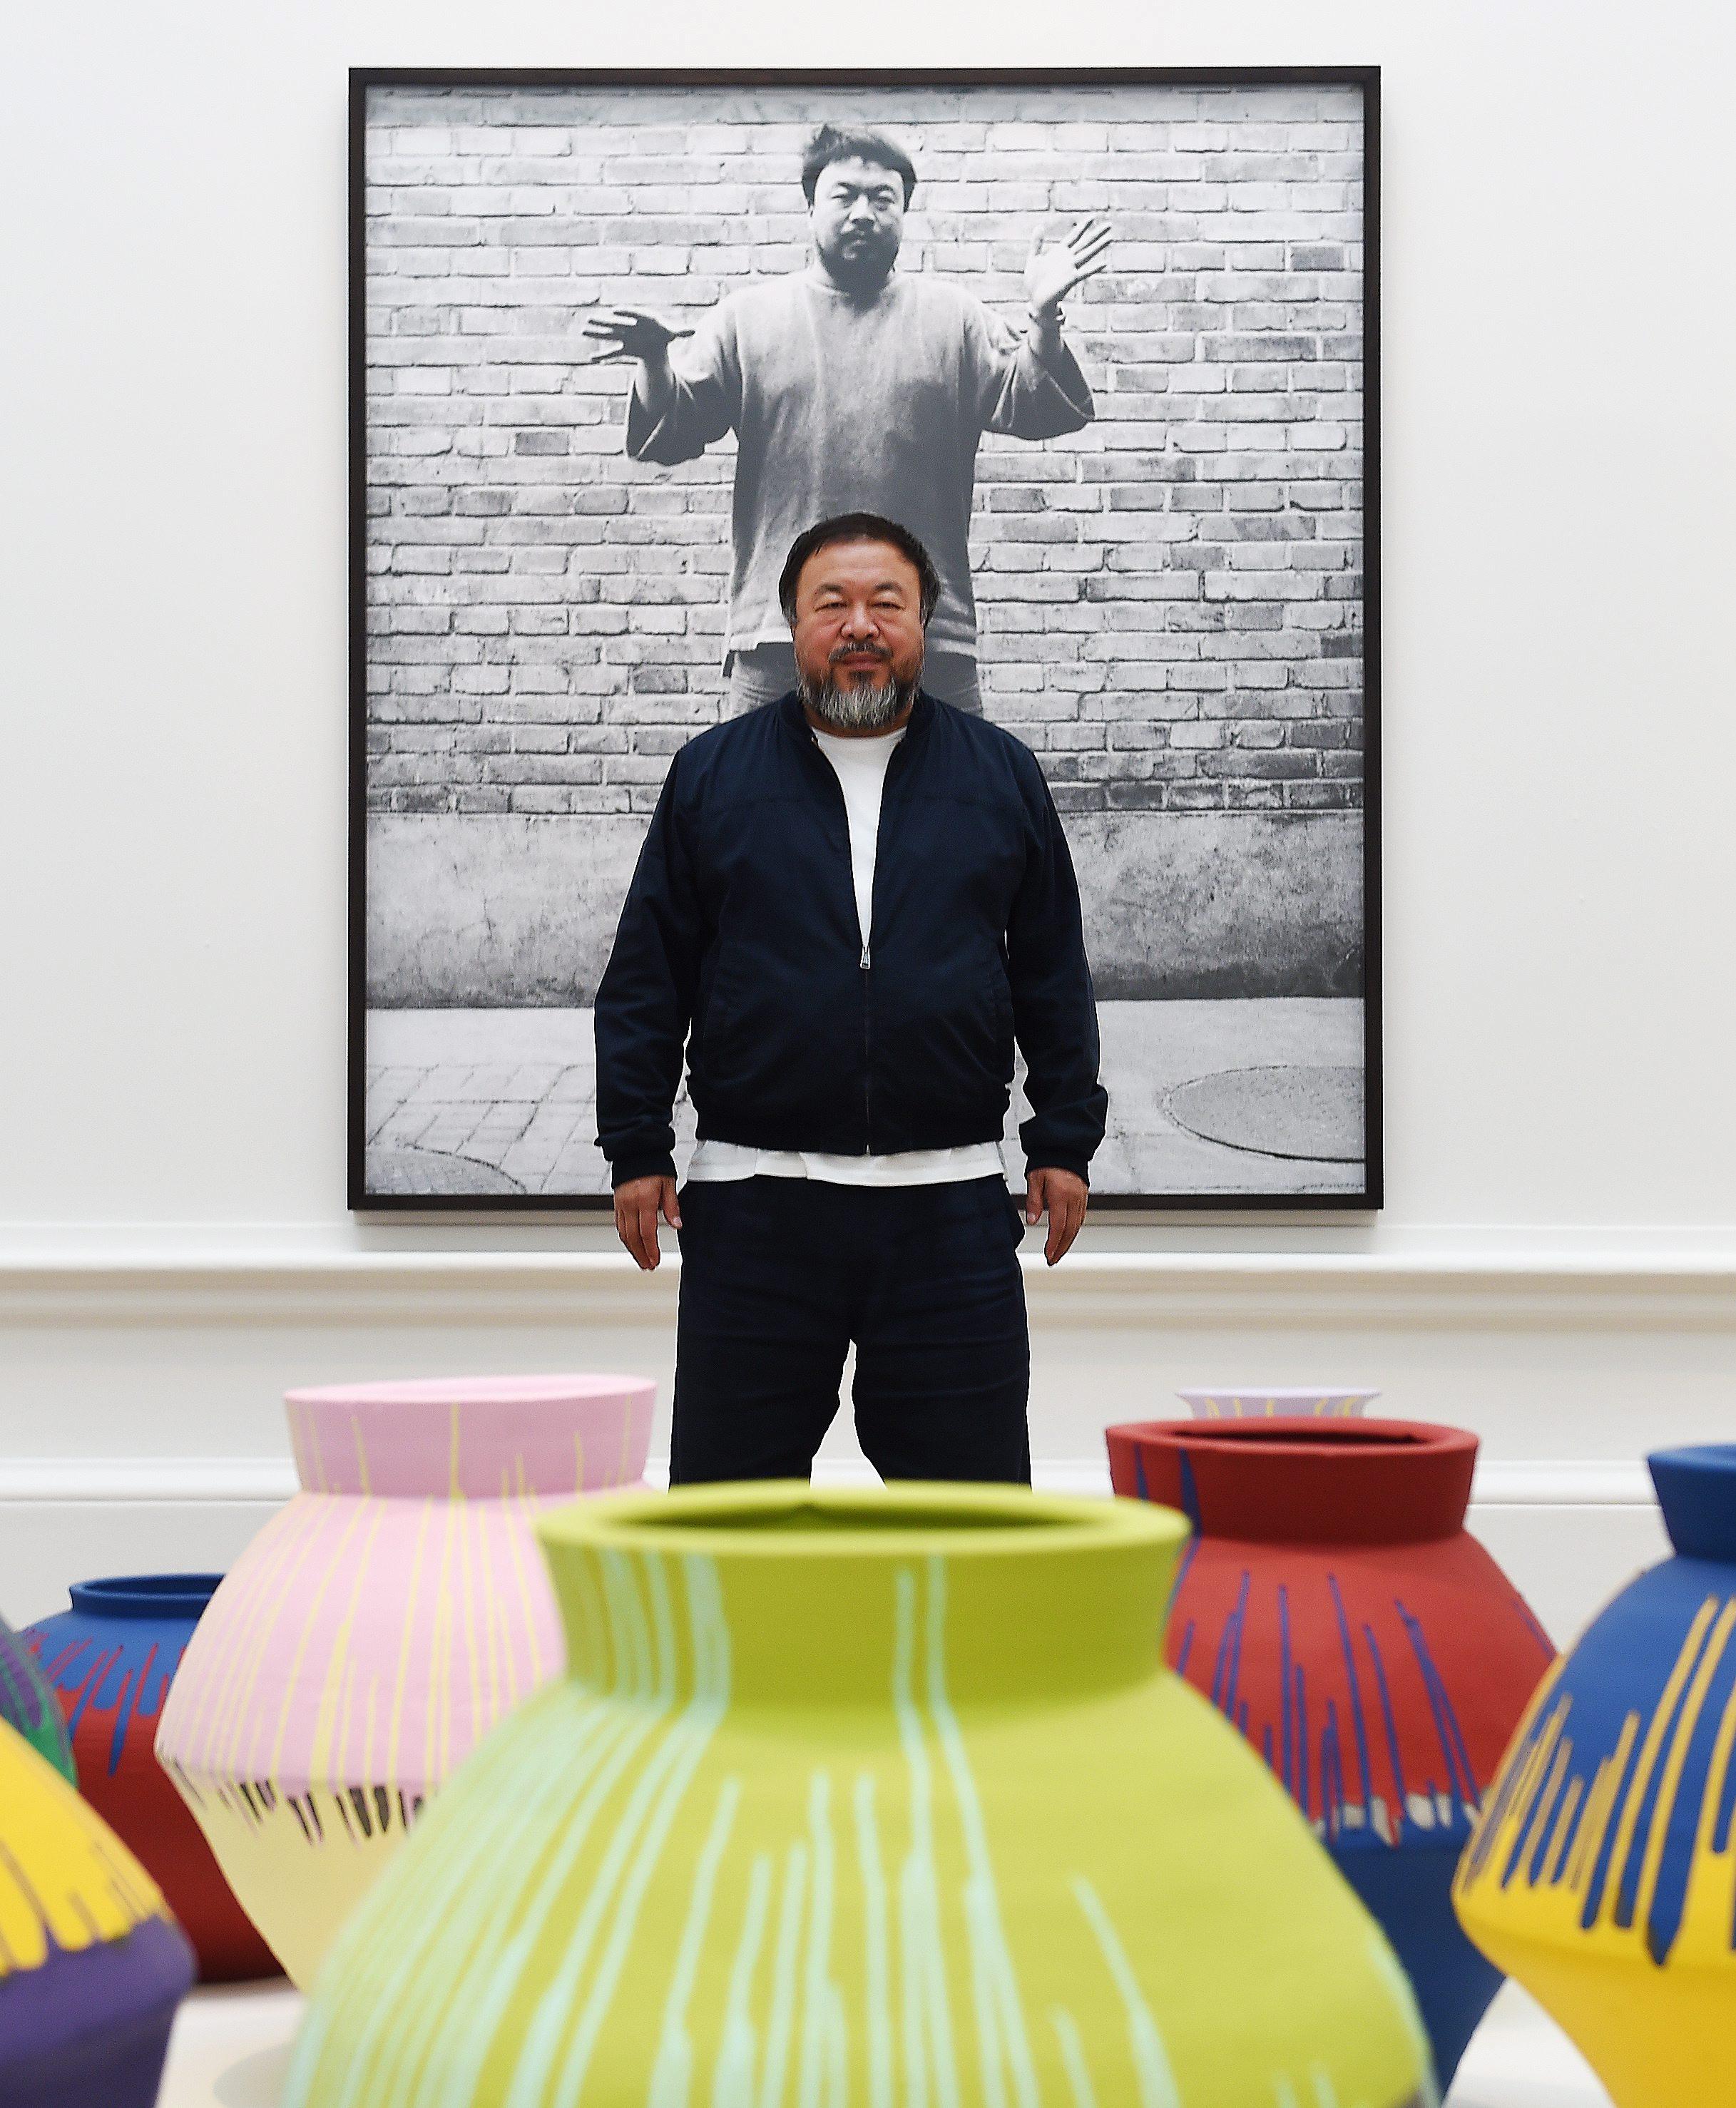 Chinese artist Ai Weiwei stands with his artwork ‘Coloured Vases’ (2015) during the unveiling of his new exhibition at the Royal Academy of Arts in London, United Kingdom on September 15, 2015. Photo: EPA